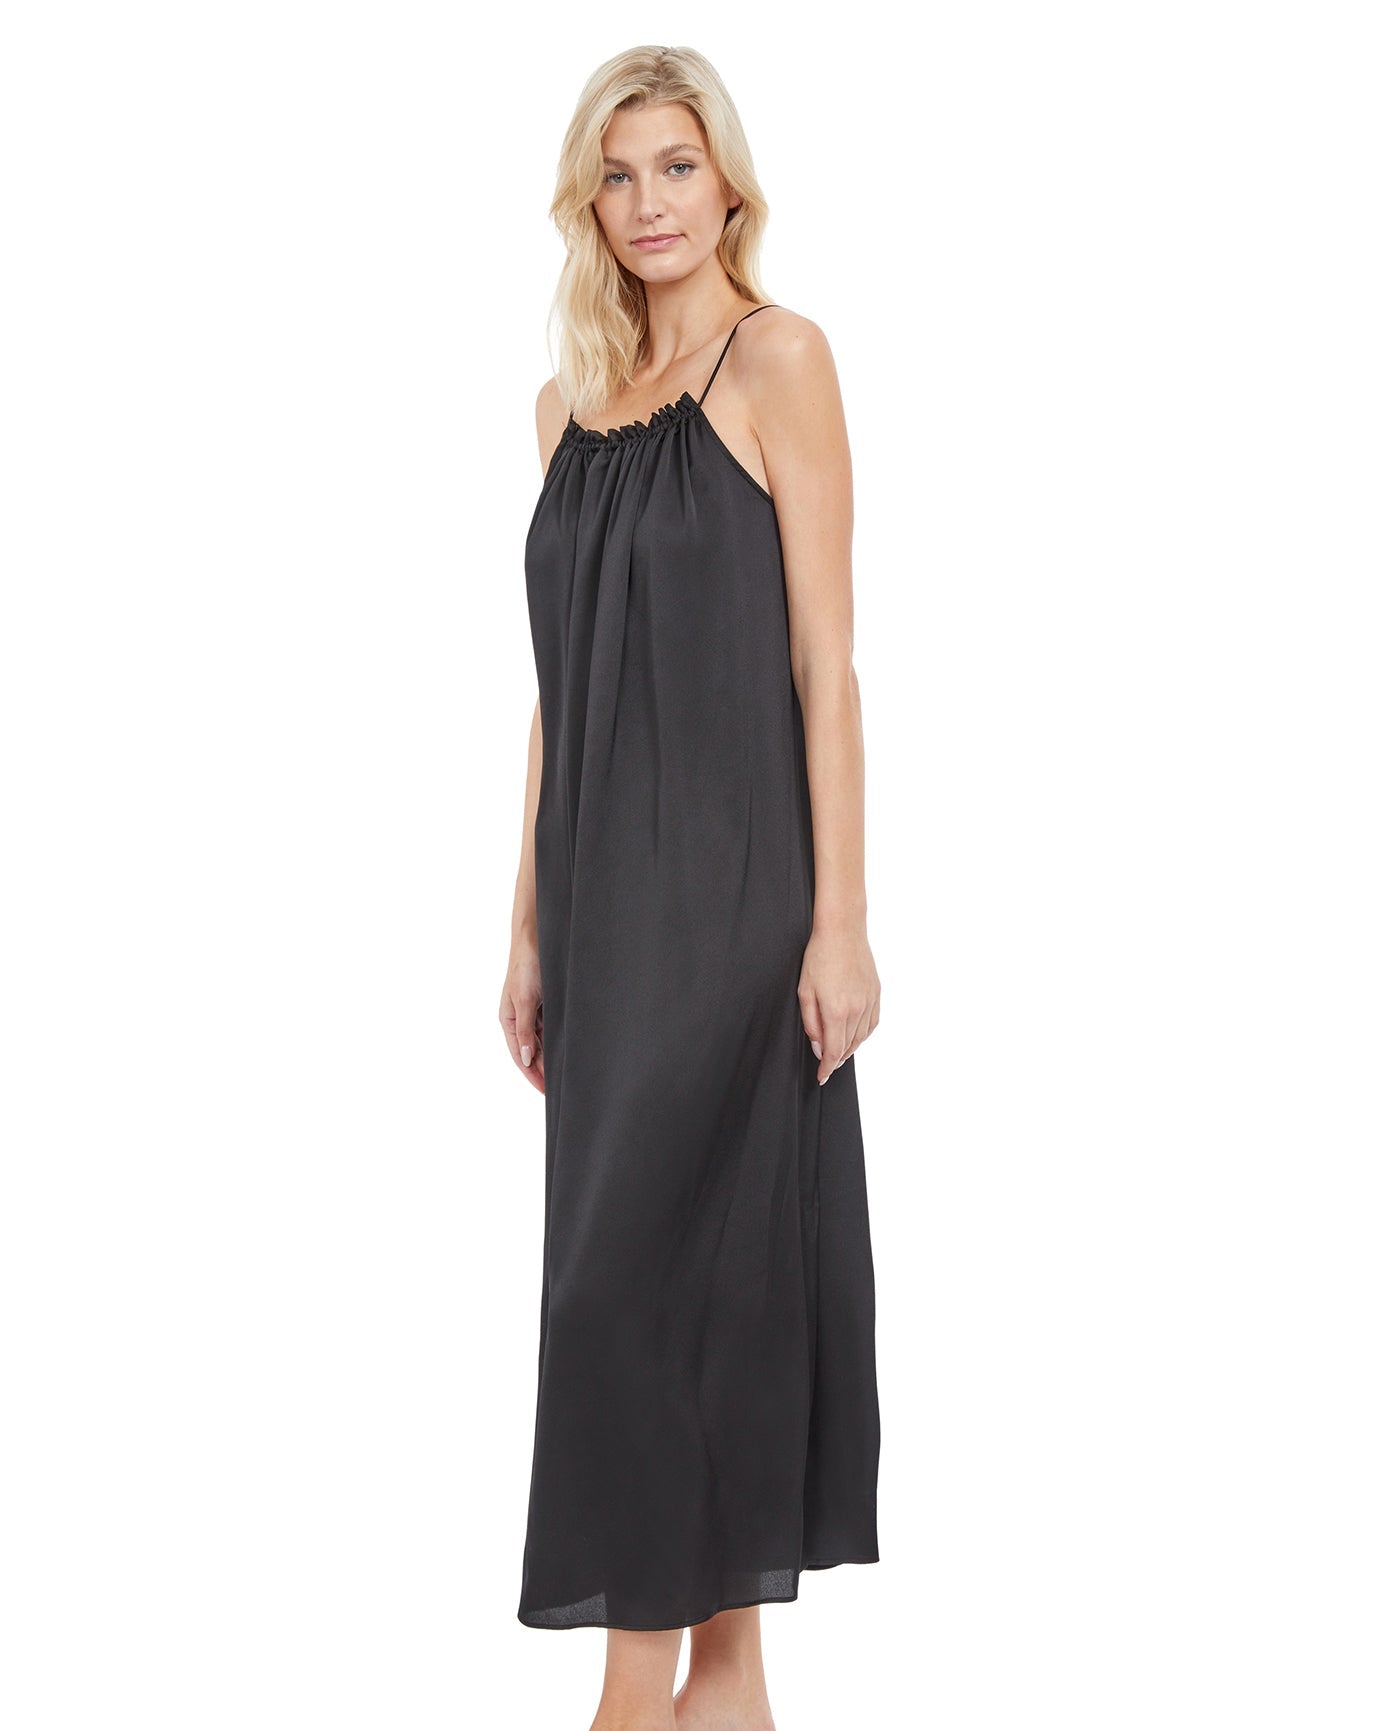 Side View View Of Gottex Classic Queen Of Paradise High Neck Long Cover Up Dress | Gottex Queen Of Paradise Black